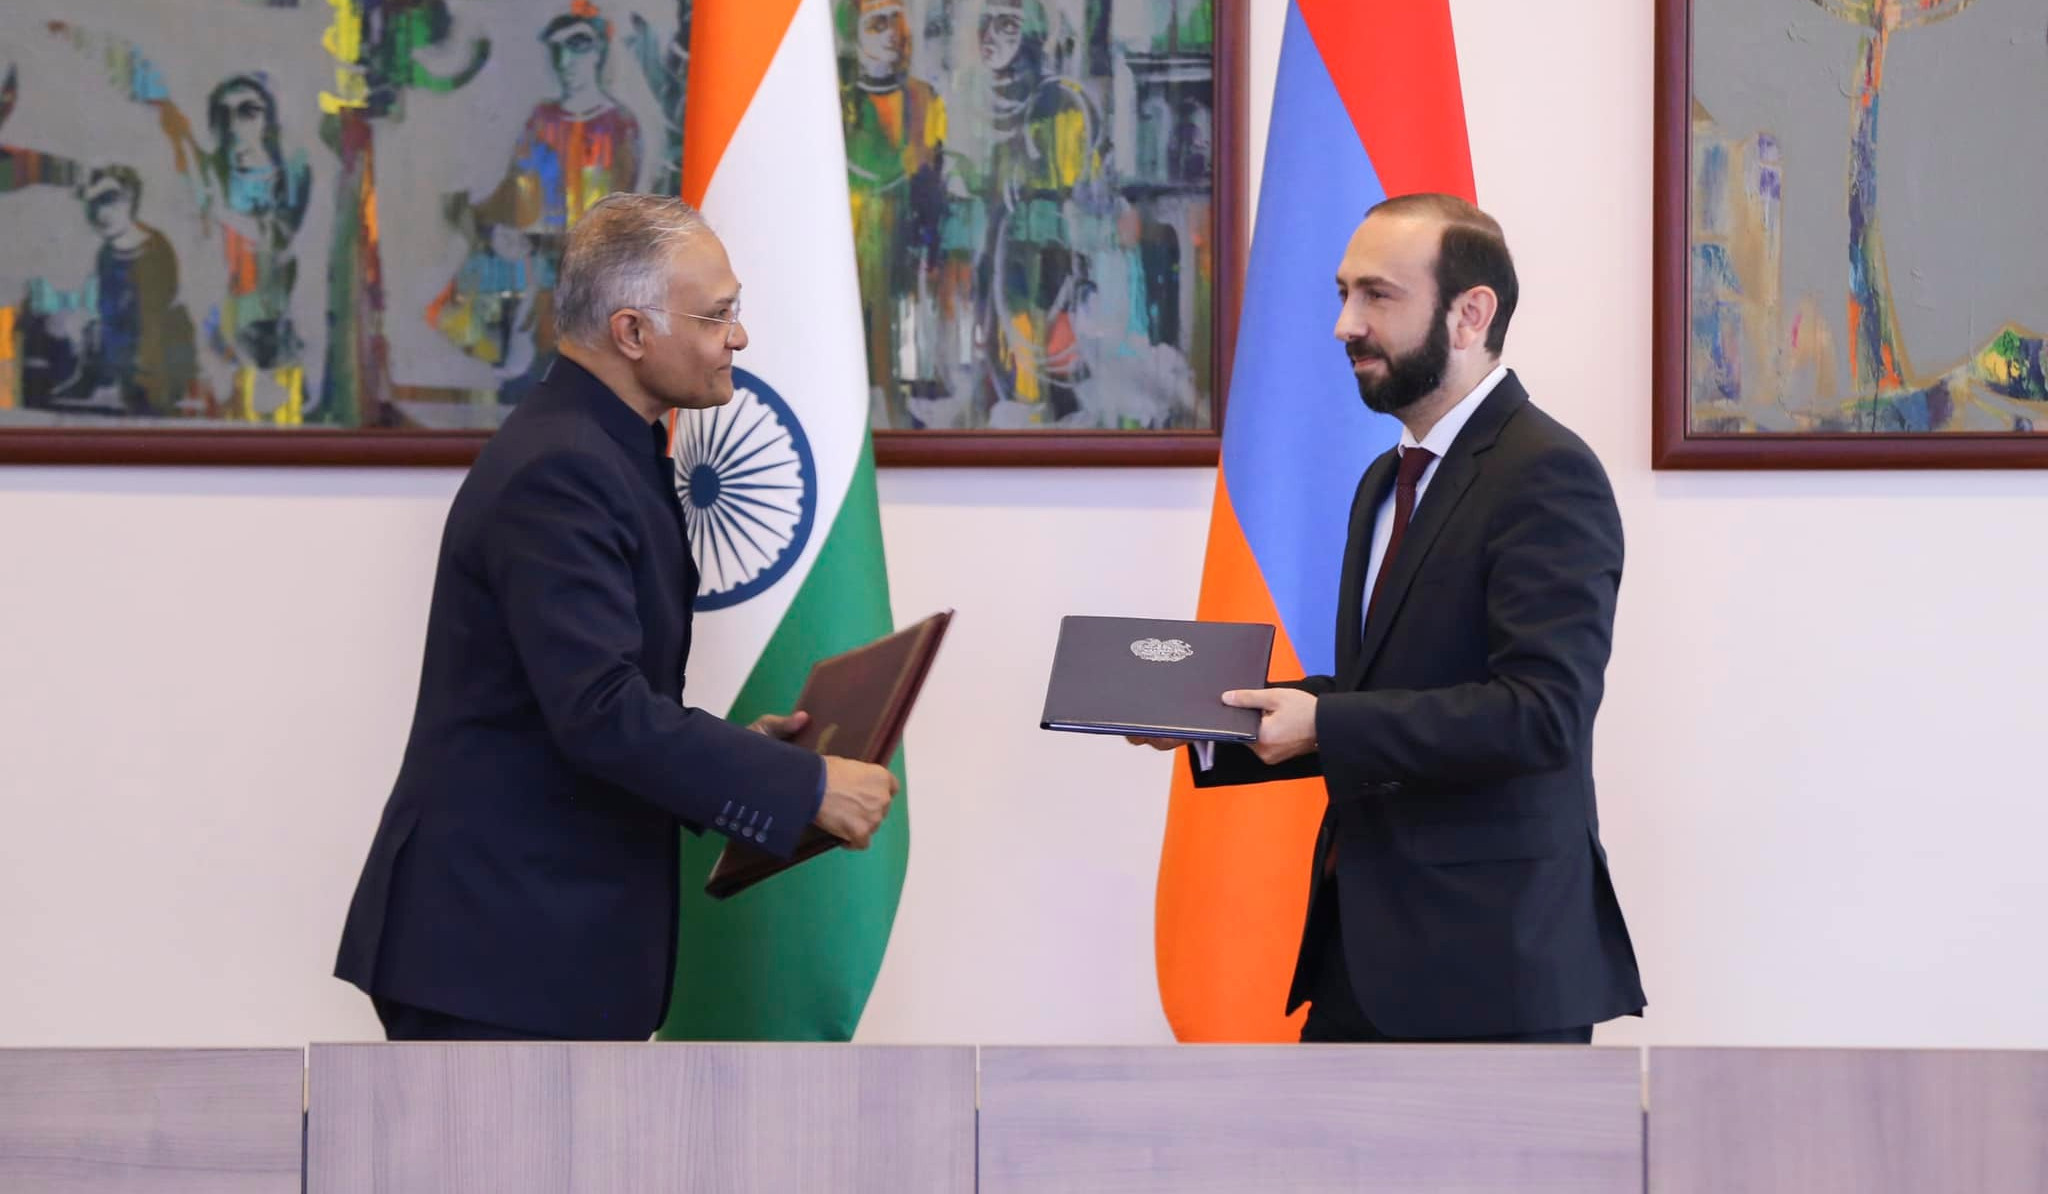 Governments of Armenia and India signed a memorandum on grant support